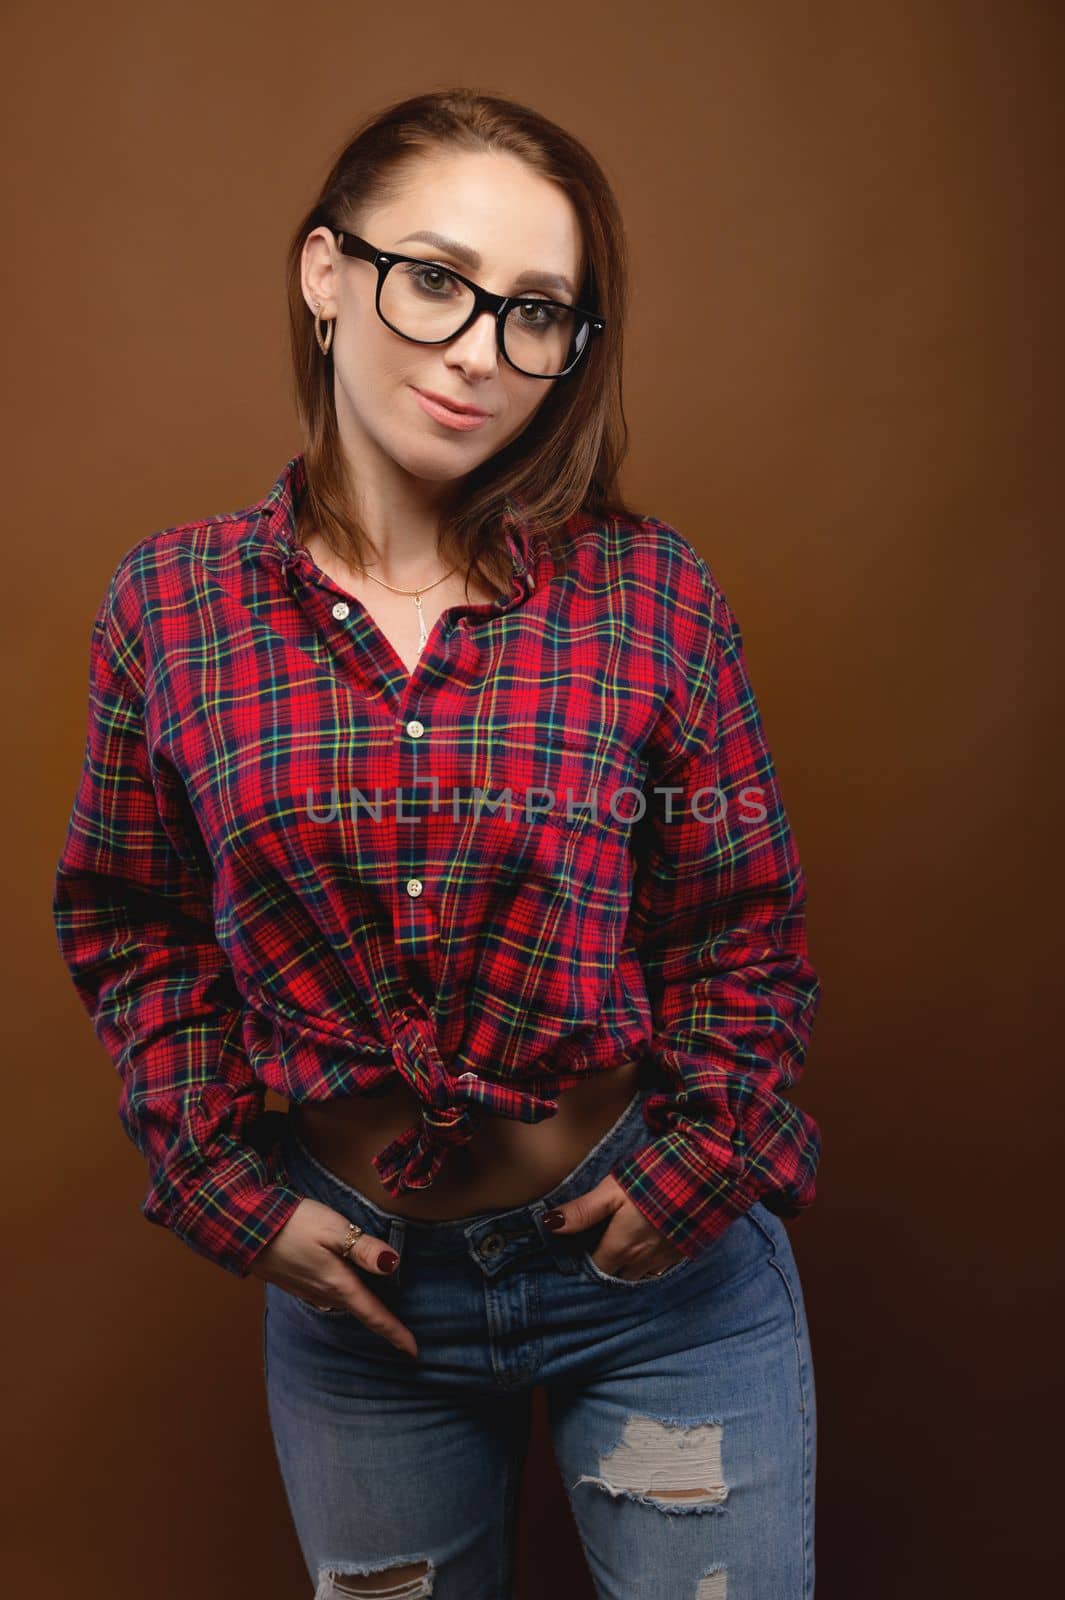 Smiling brunette in glasses posing with her hands in her jeans pockets and looking at the camera, studio by yanik88